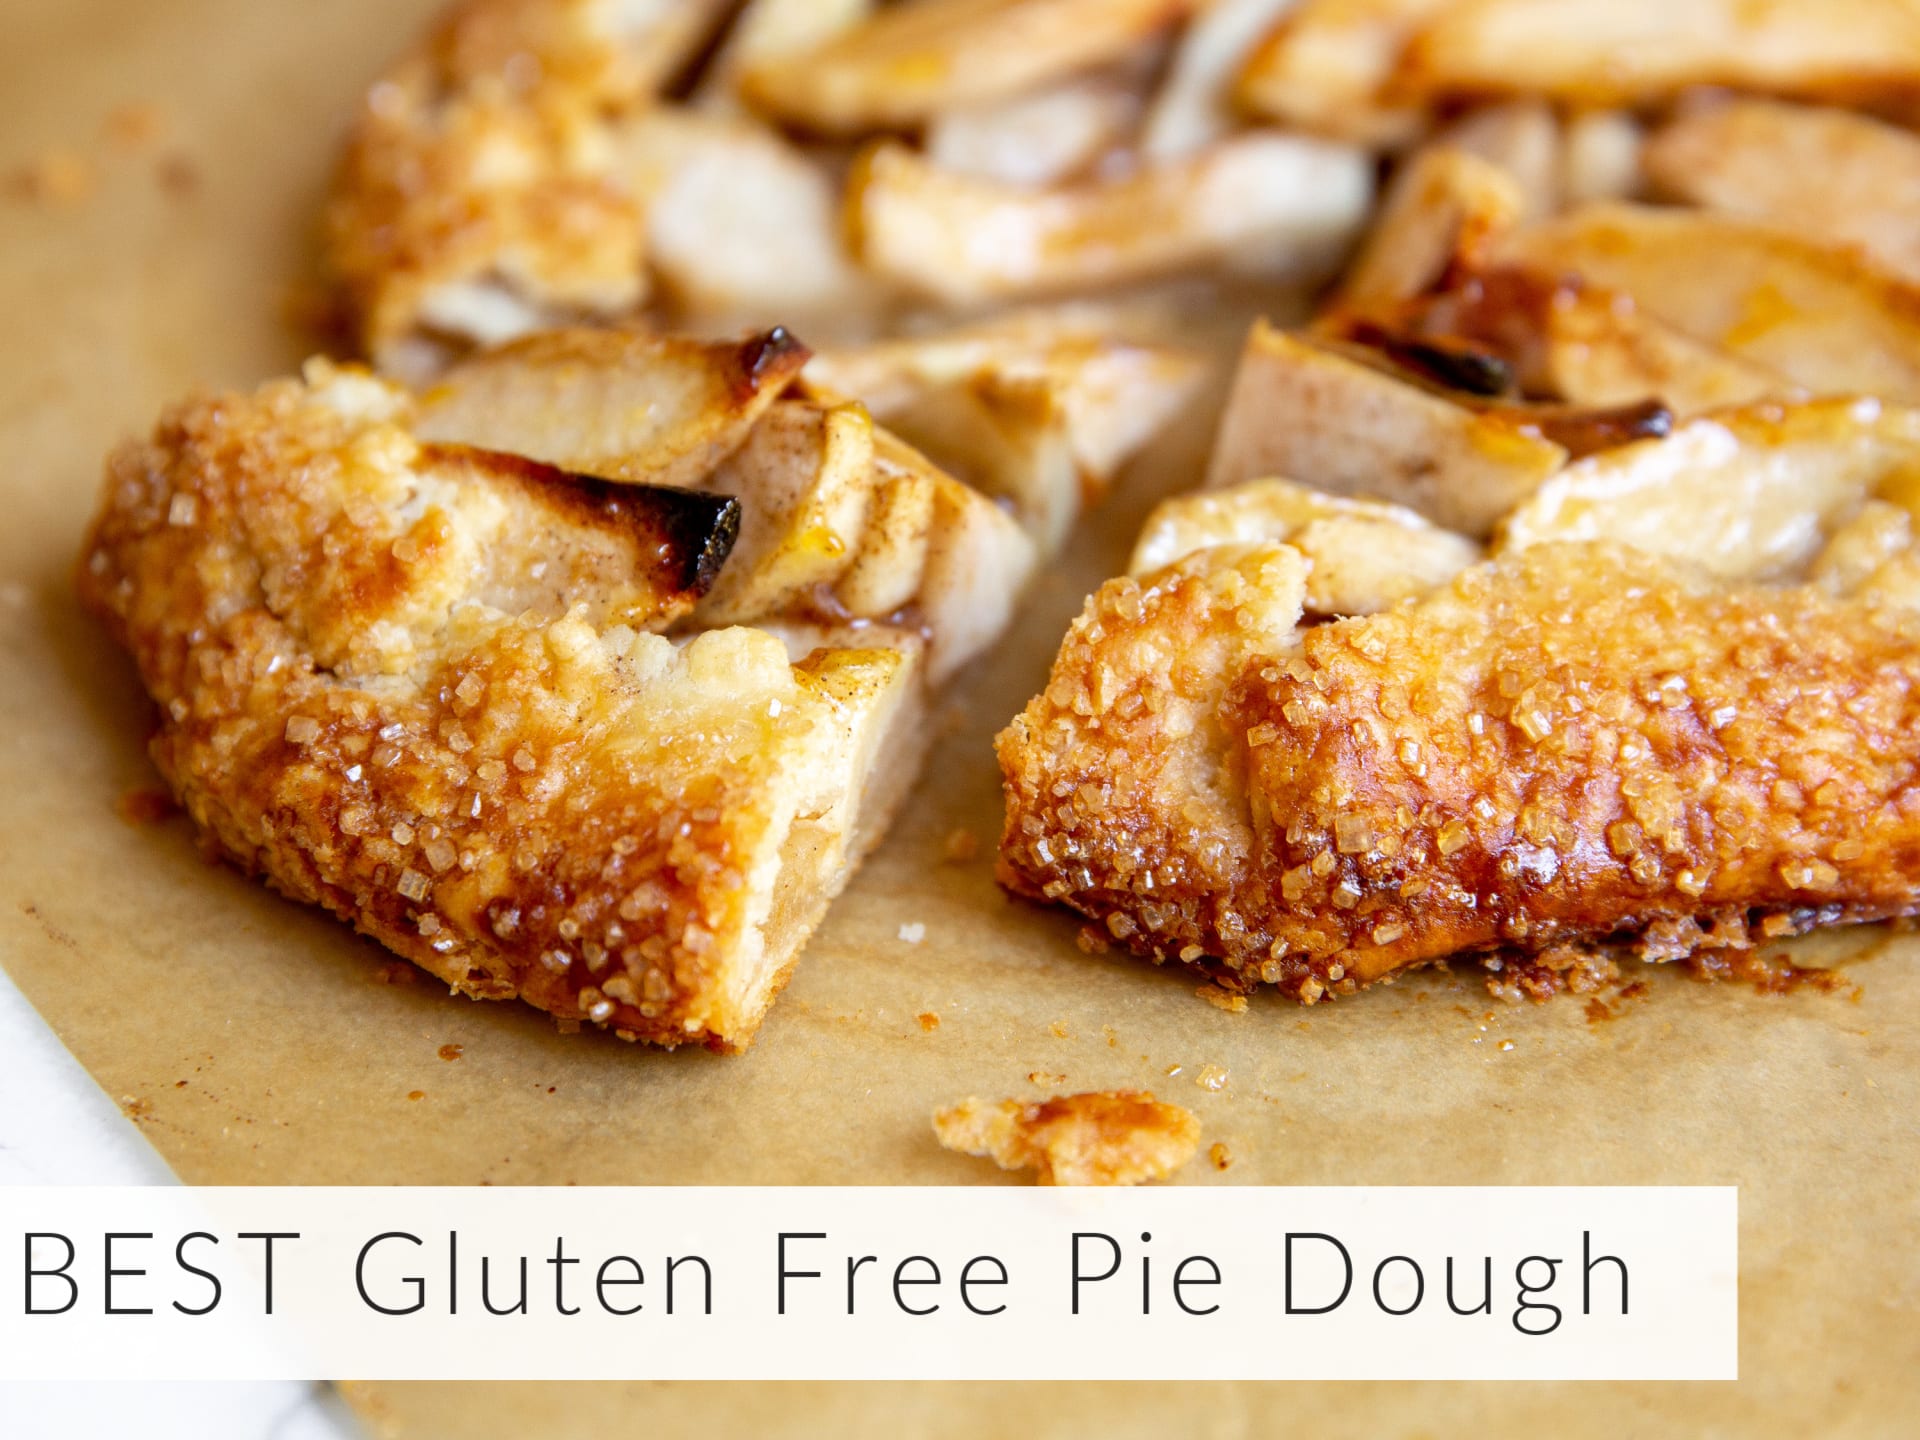 9 Tips for Baking and Cooking with Gluten-Free Flour